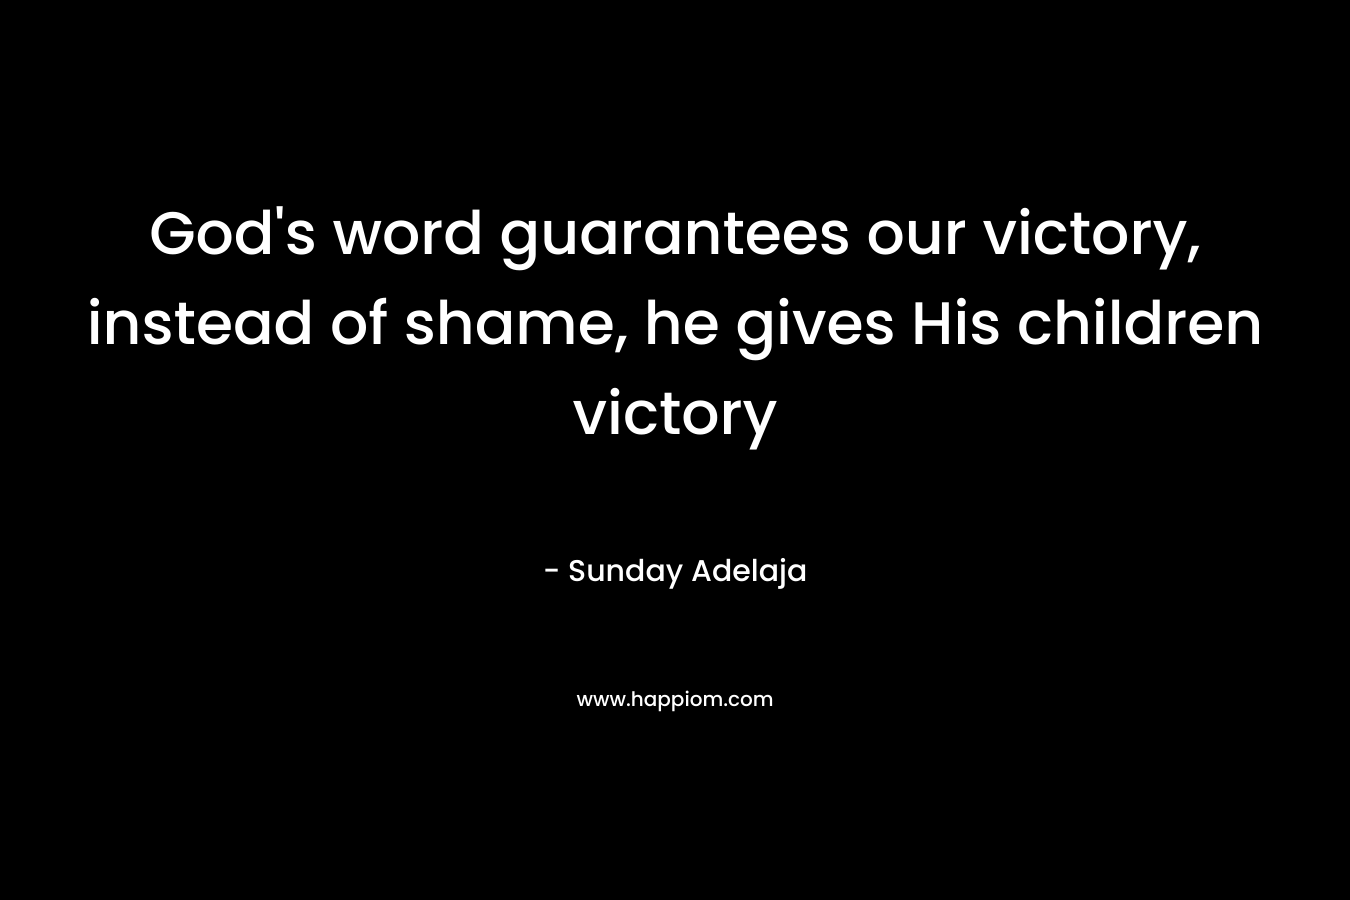 God's word guarantees our victory, instead of shame, he gives His children victory